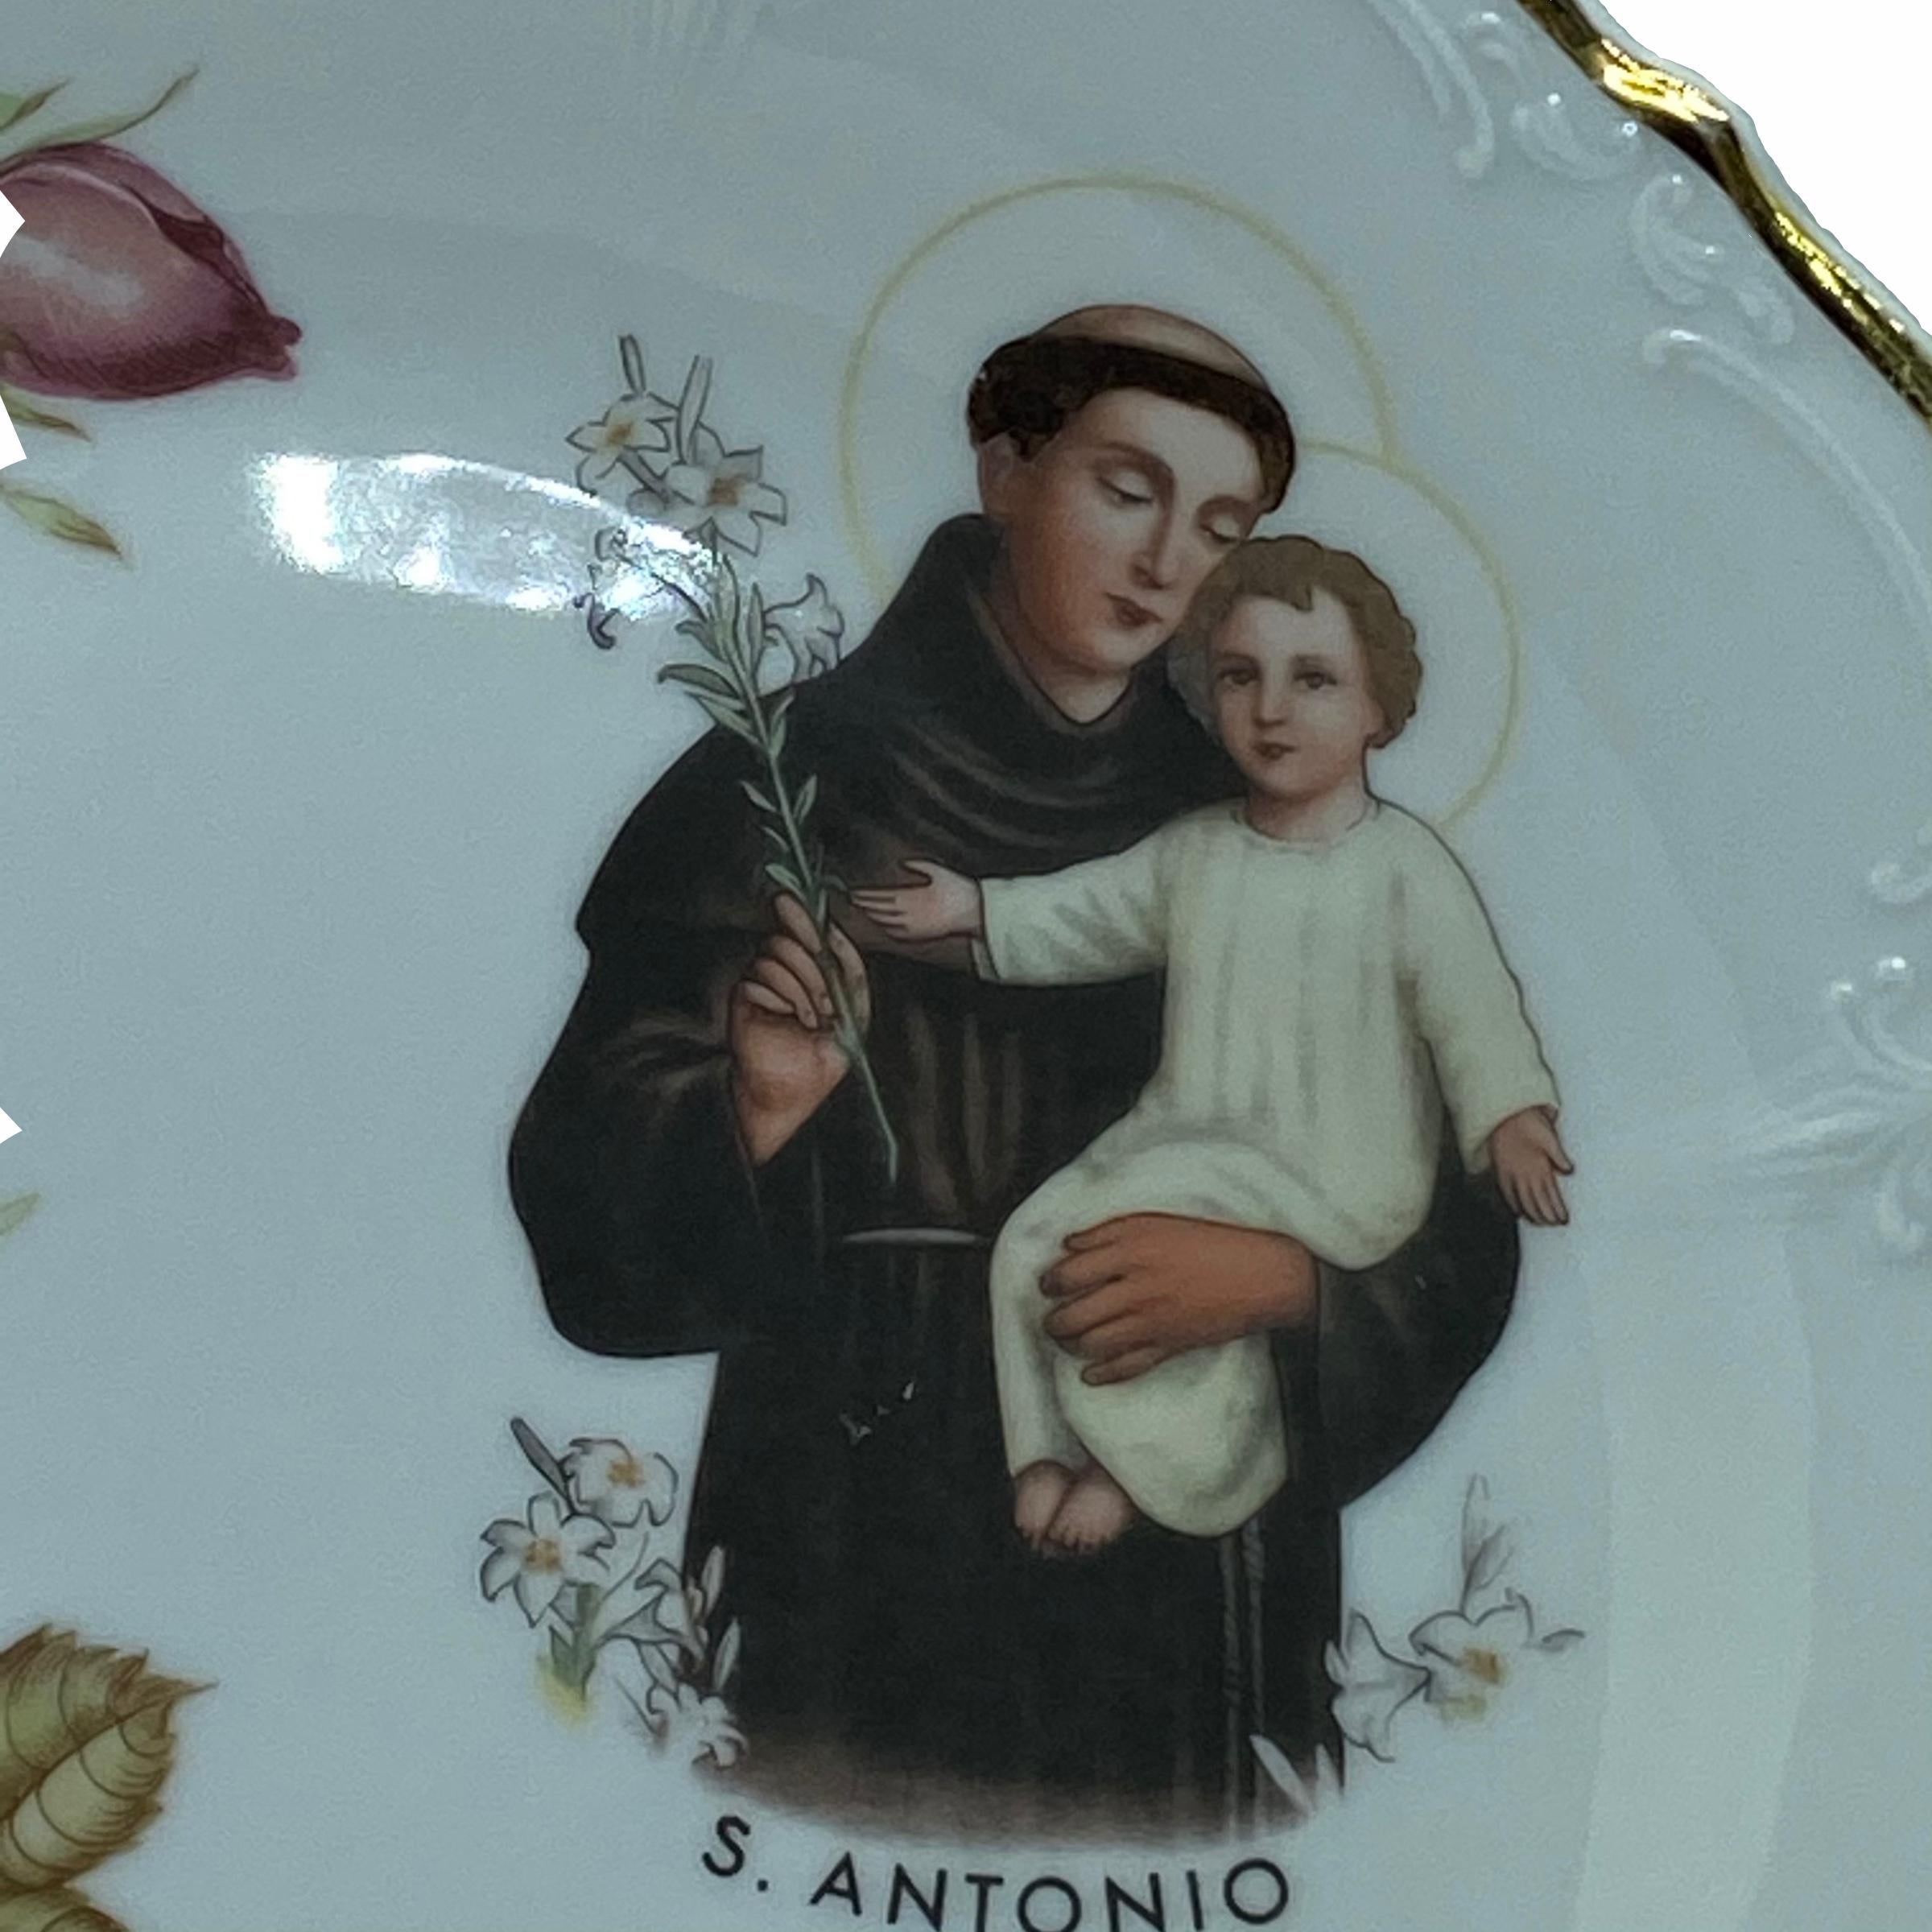 This beautiful plate was made by Tirschenreuth Bavaria, Germany for the Italian market. It is marked at the back with manufactory sign. It shows the holy S. Antonio, with the Italian words for 